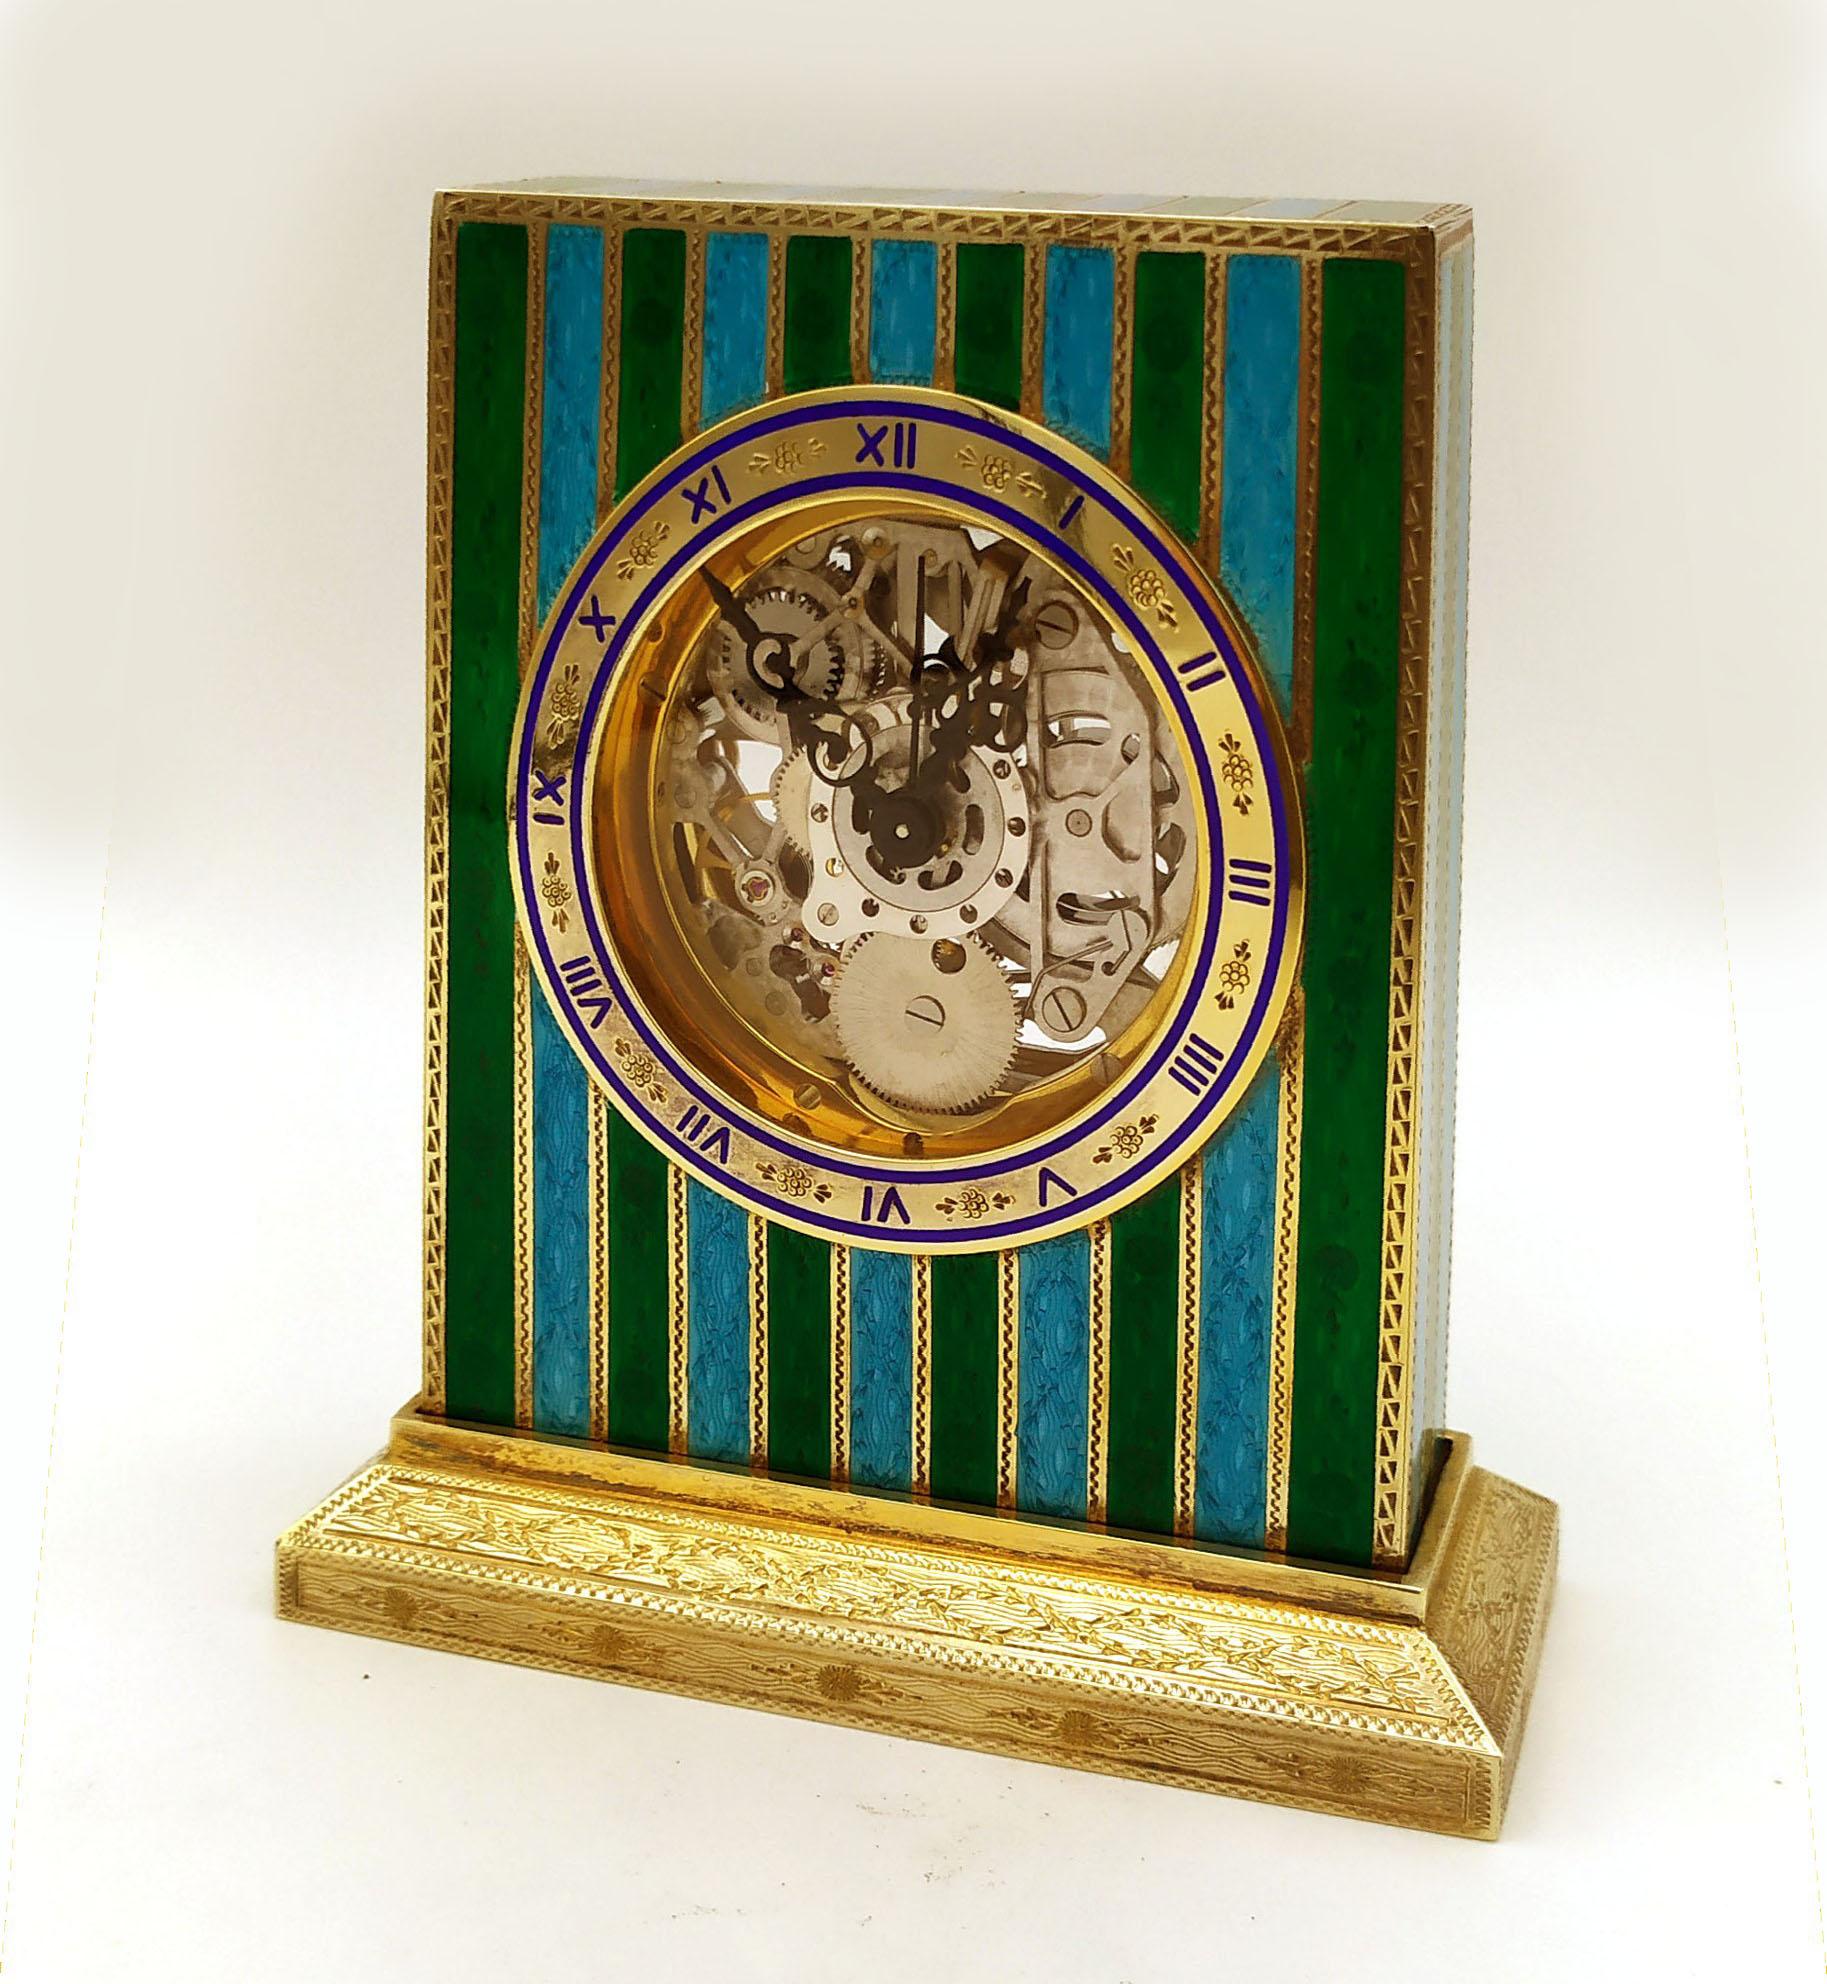 Table set made up of a clock and 2 candlesticks in 925/1000 sterling silver gold plated with two-tone translucent stripes fire-enamelled on guillochè and fine hand-engravings.
The clock has a base of cm. 4.5 x 10 and is rectangular cm. 8.3 x 10.2 x